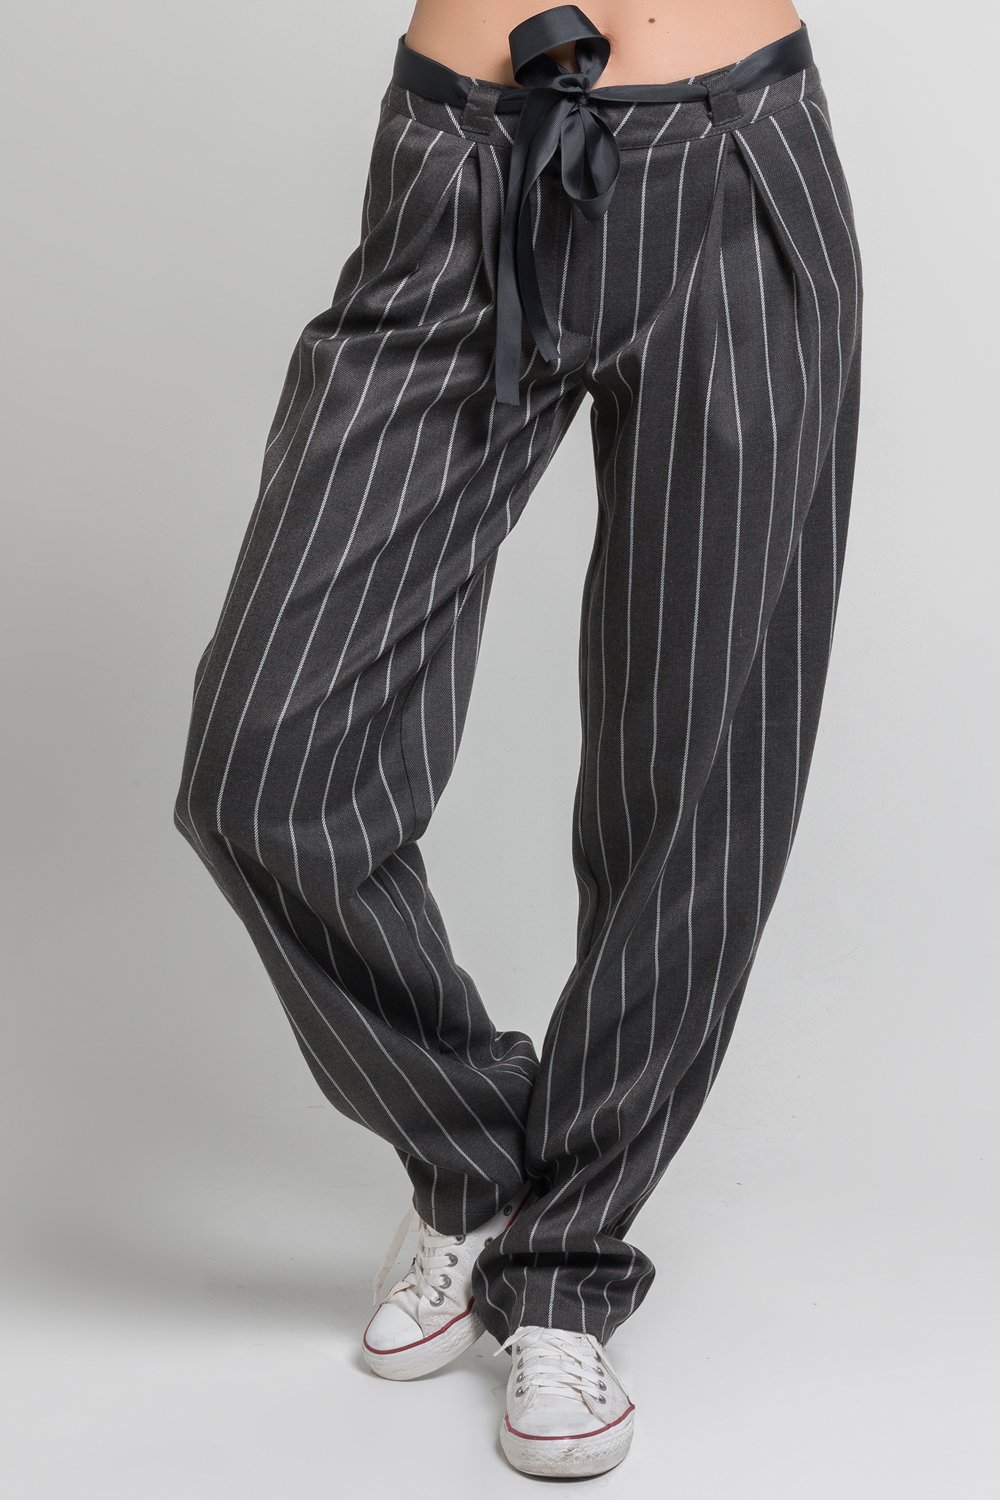 Grey striped trousers